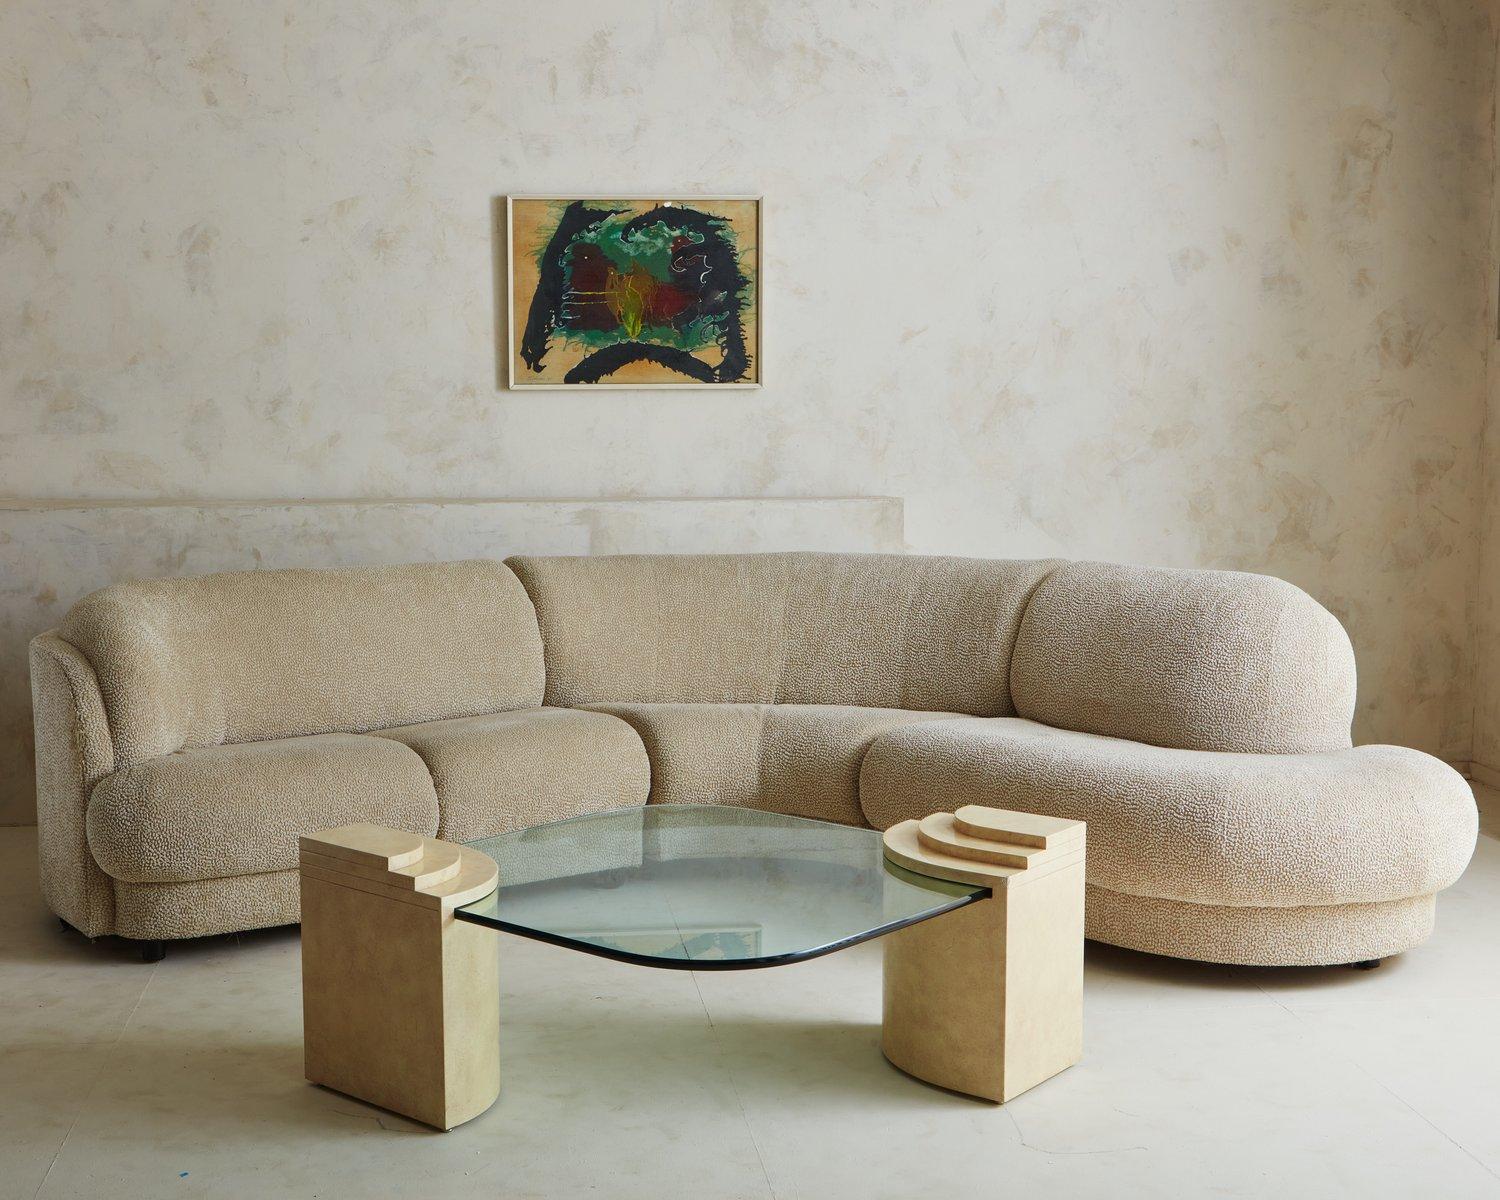 A vintage coffee table featuring a 1” thick square glass table top with rounded edges. The top fits into two cream faux marble laminate supports on opposite ends. Each support has three decorative curved tiers. USA, 1990s.